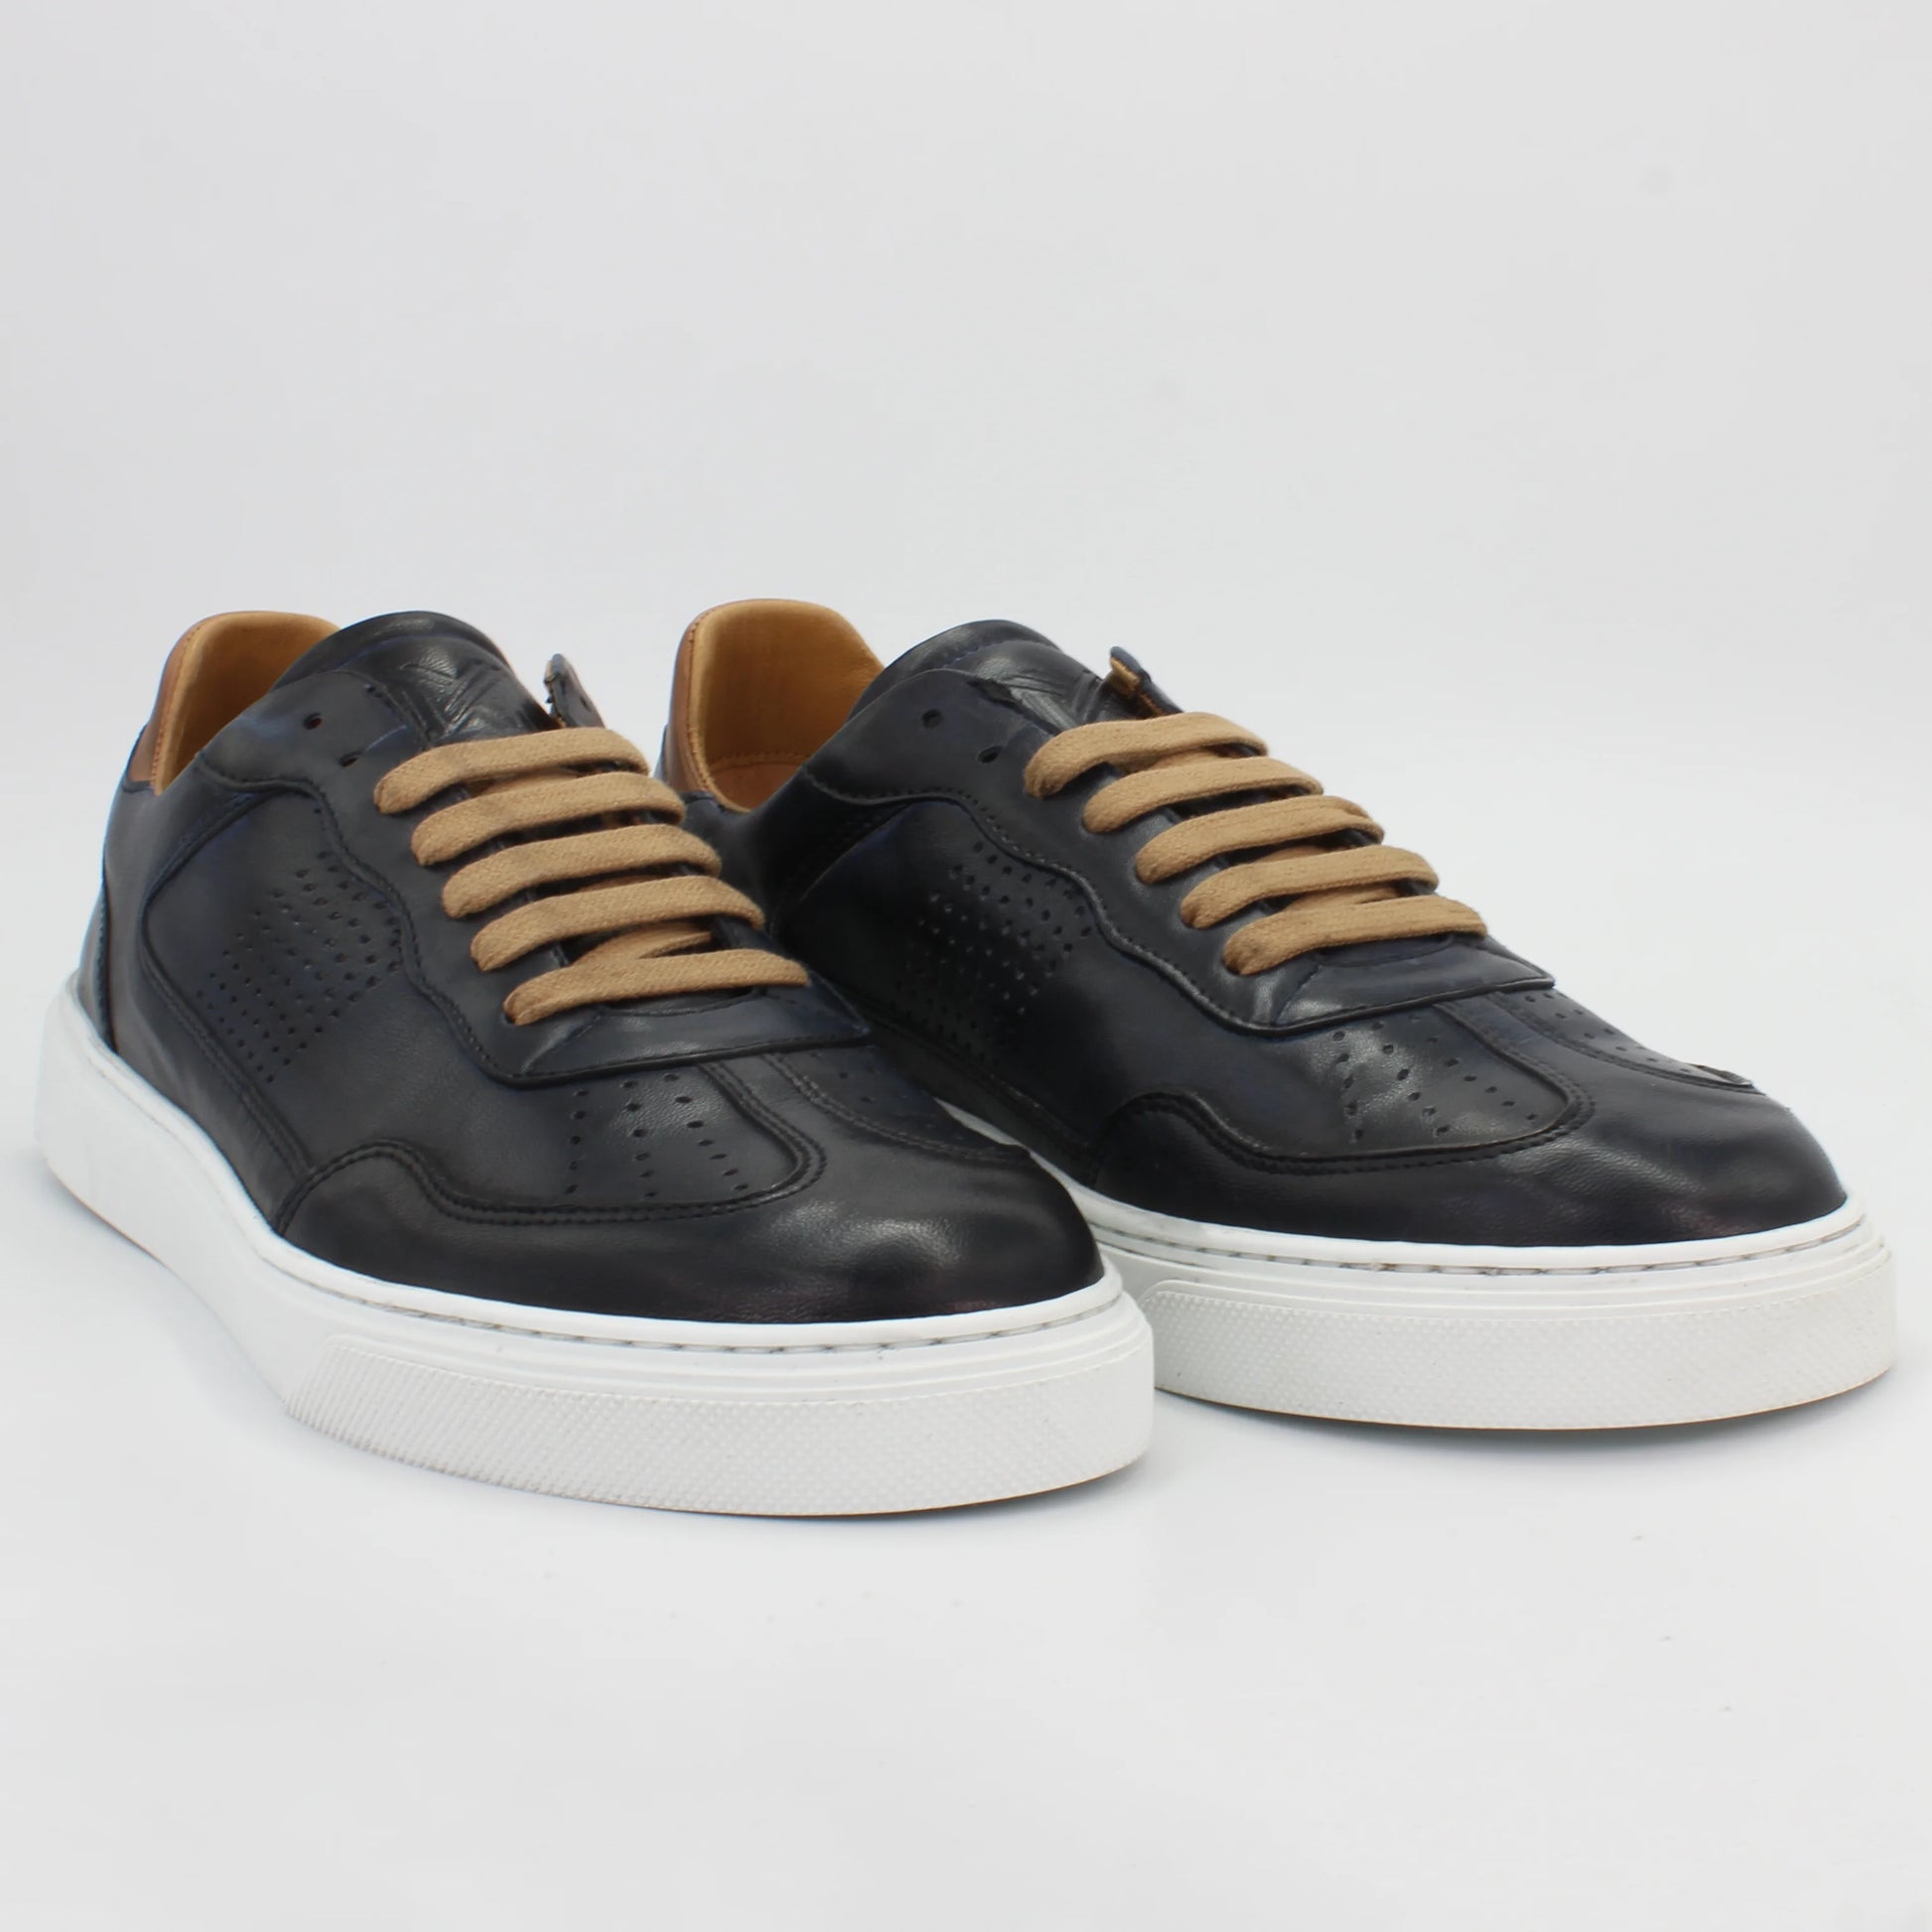 Shop Handmade Italian Leather sneaker in blue (GR433) or browse our range of hand-made Italian shoes for men in leather or suede in-store at Aliverti Cape Town, or shop online. We deliver in South Africa & offer multiple payment plans as well as accept multiple safe & secure payment methods.